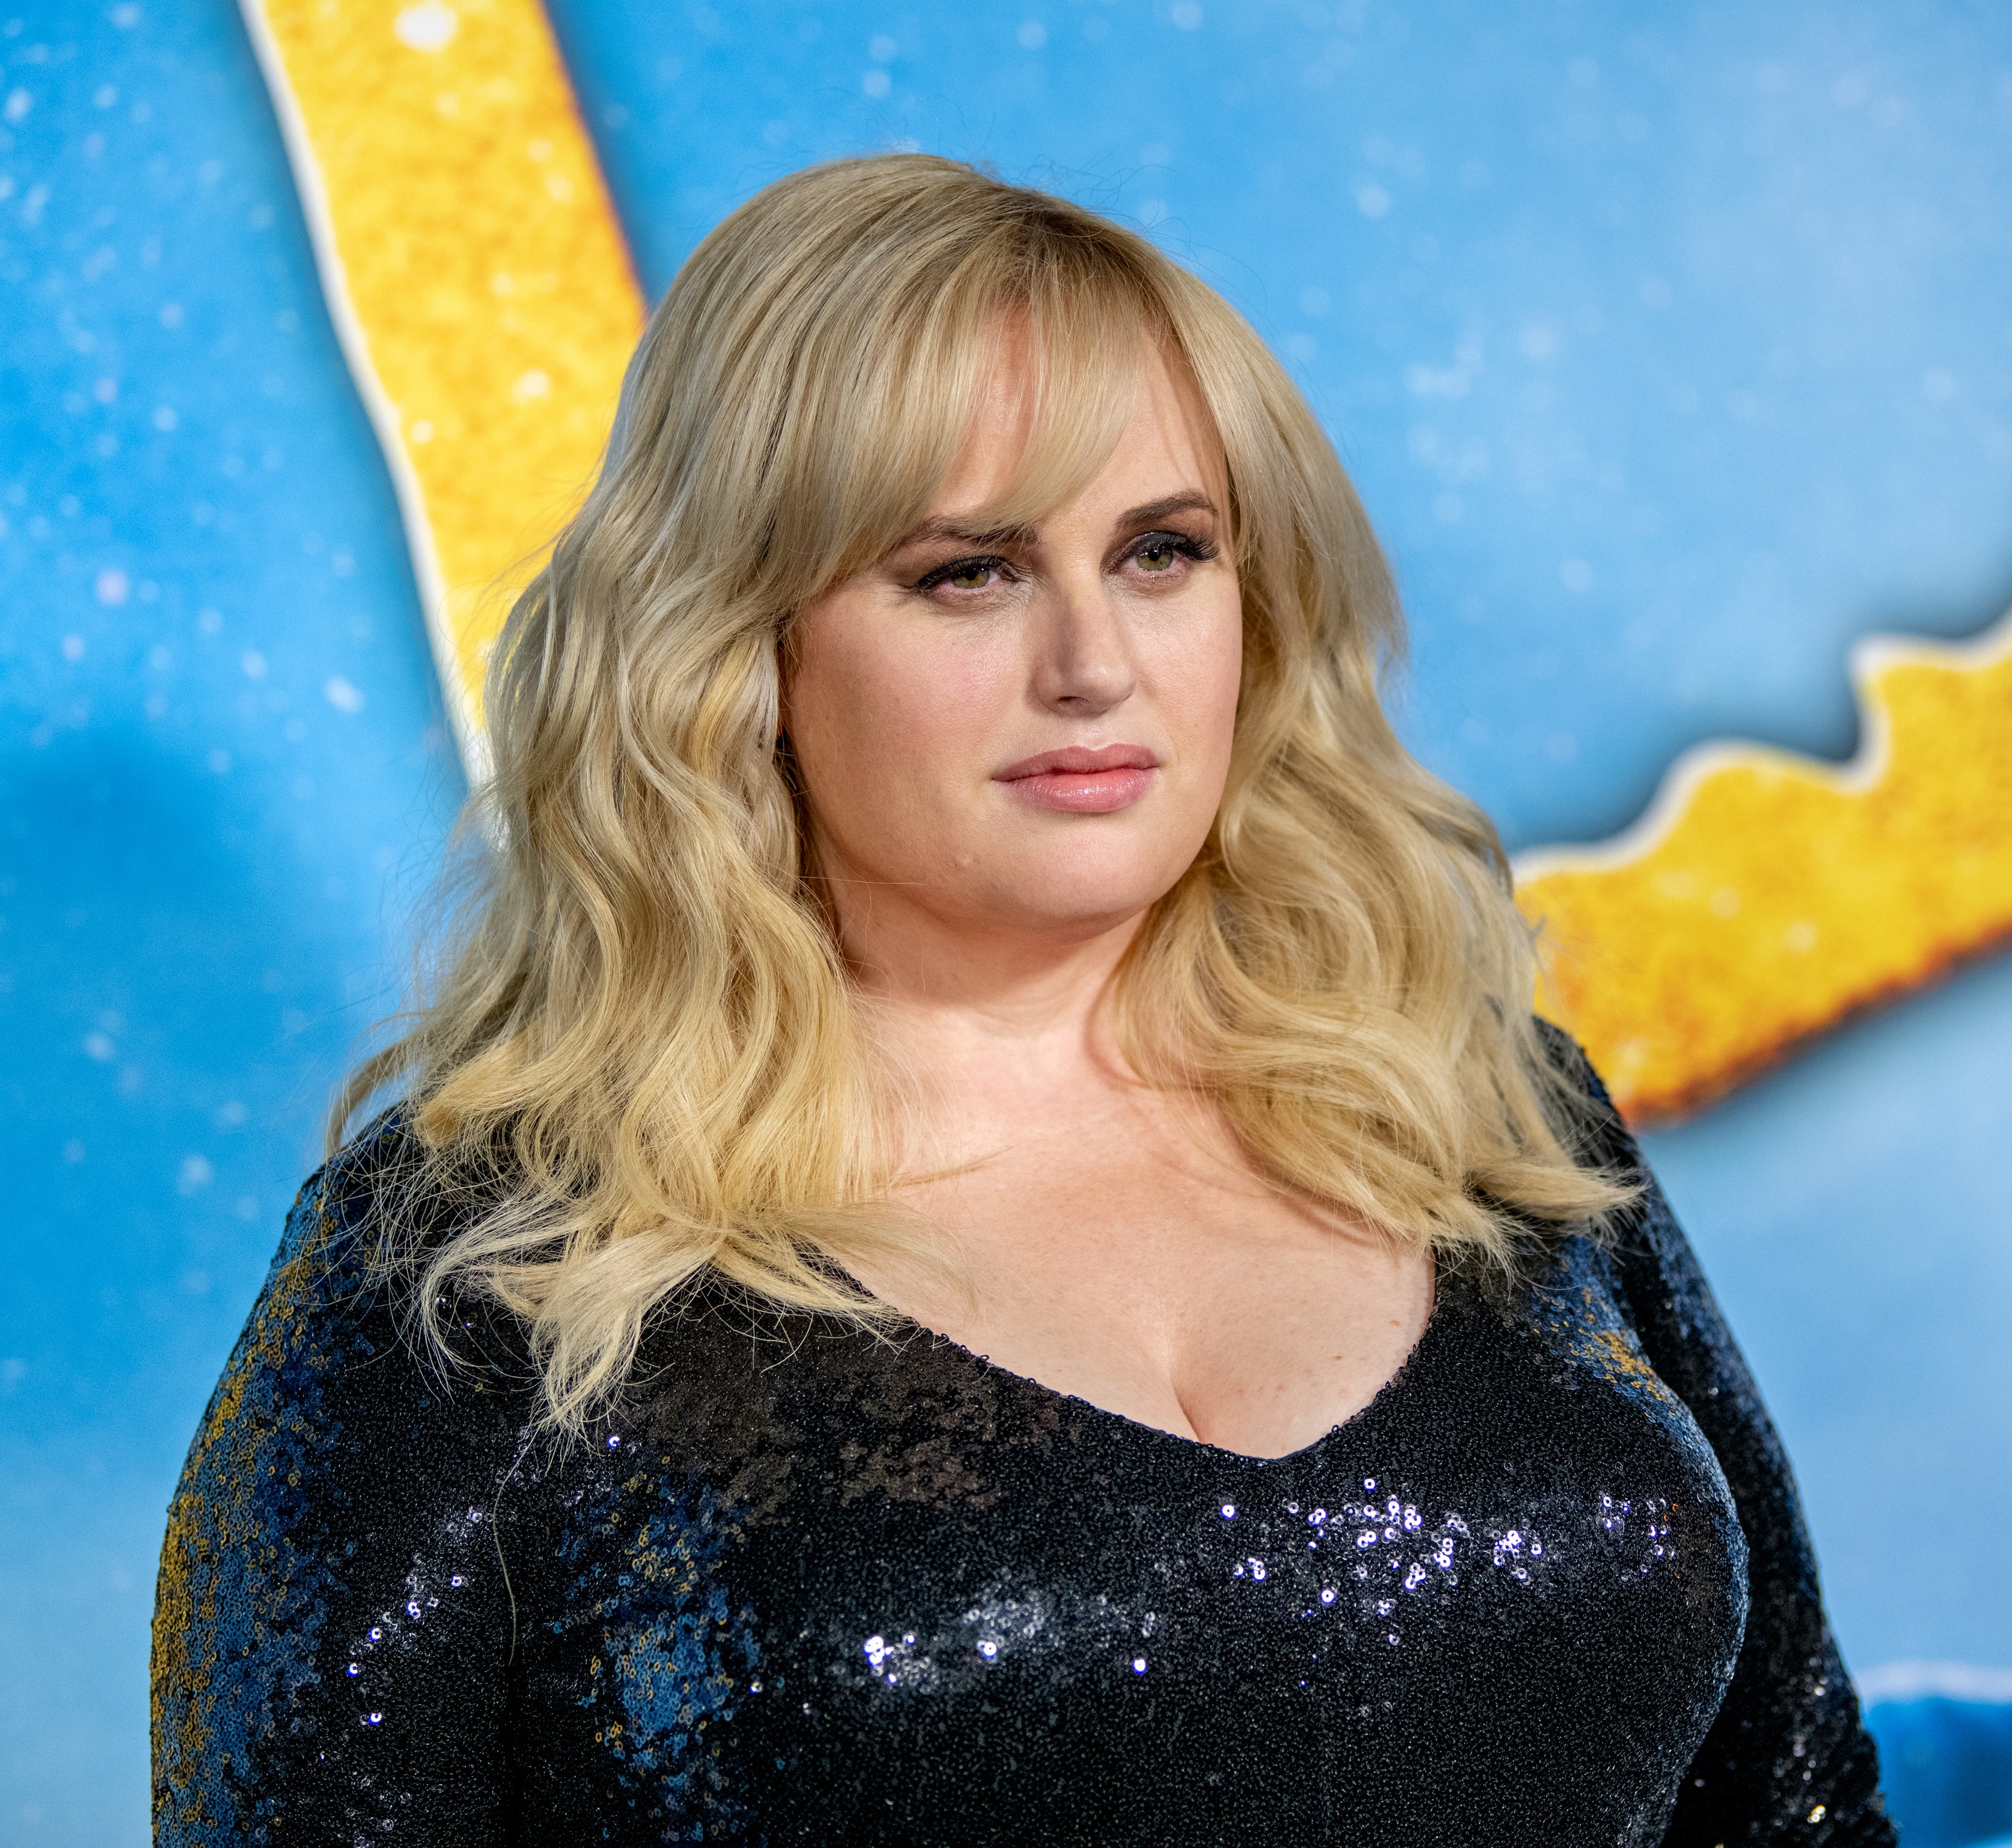 Rebel Wilson in a sequined outfit at a film event